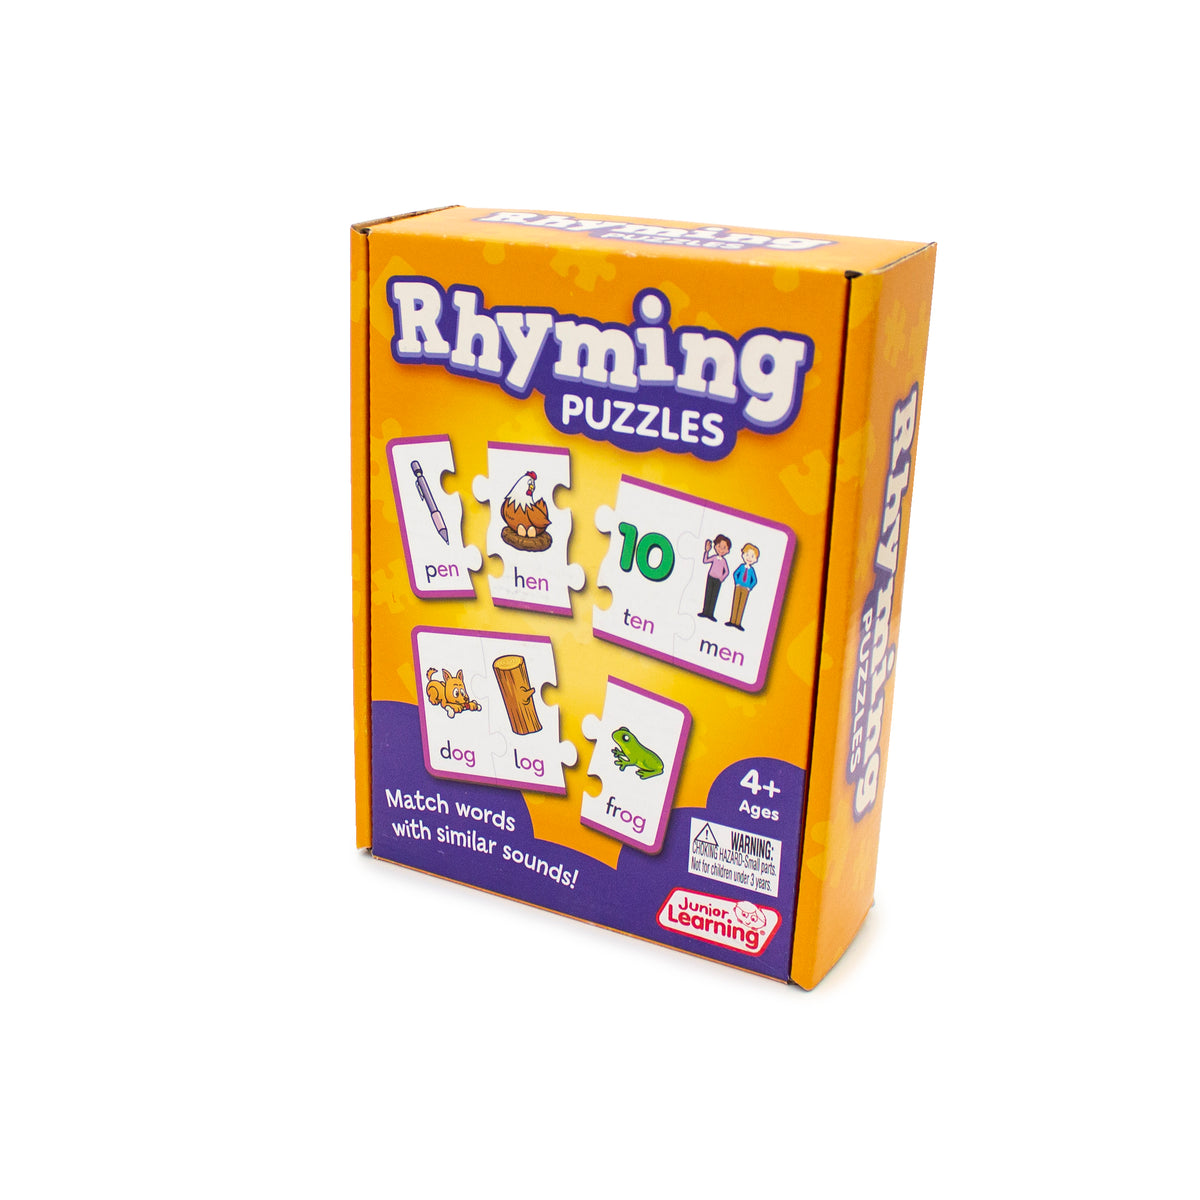 Junior Learning JL656 Rhyming Puzzles box angled left